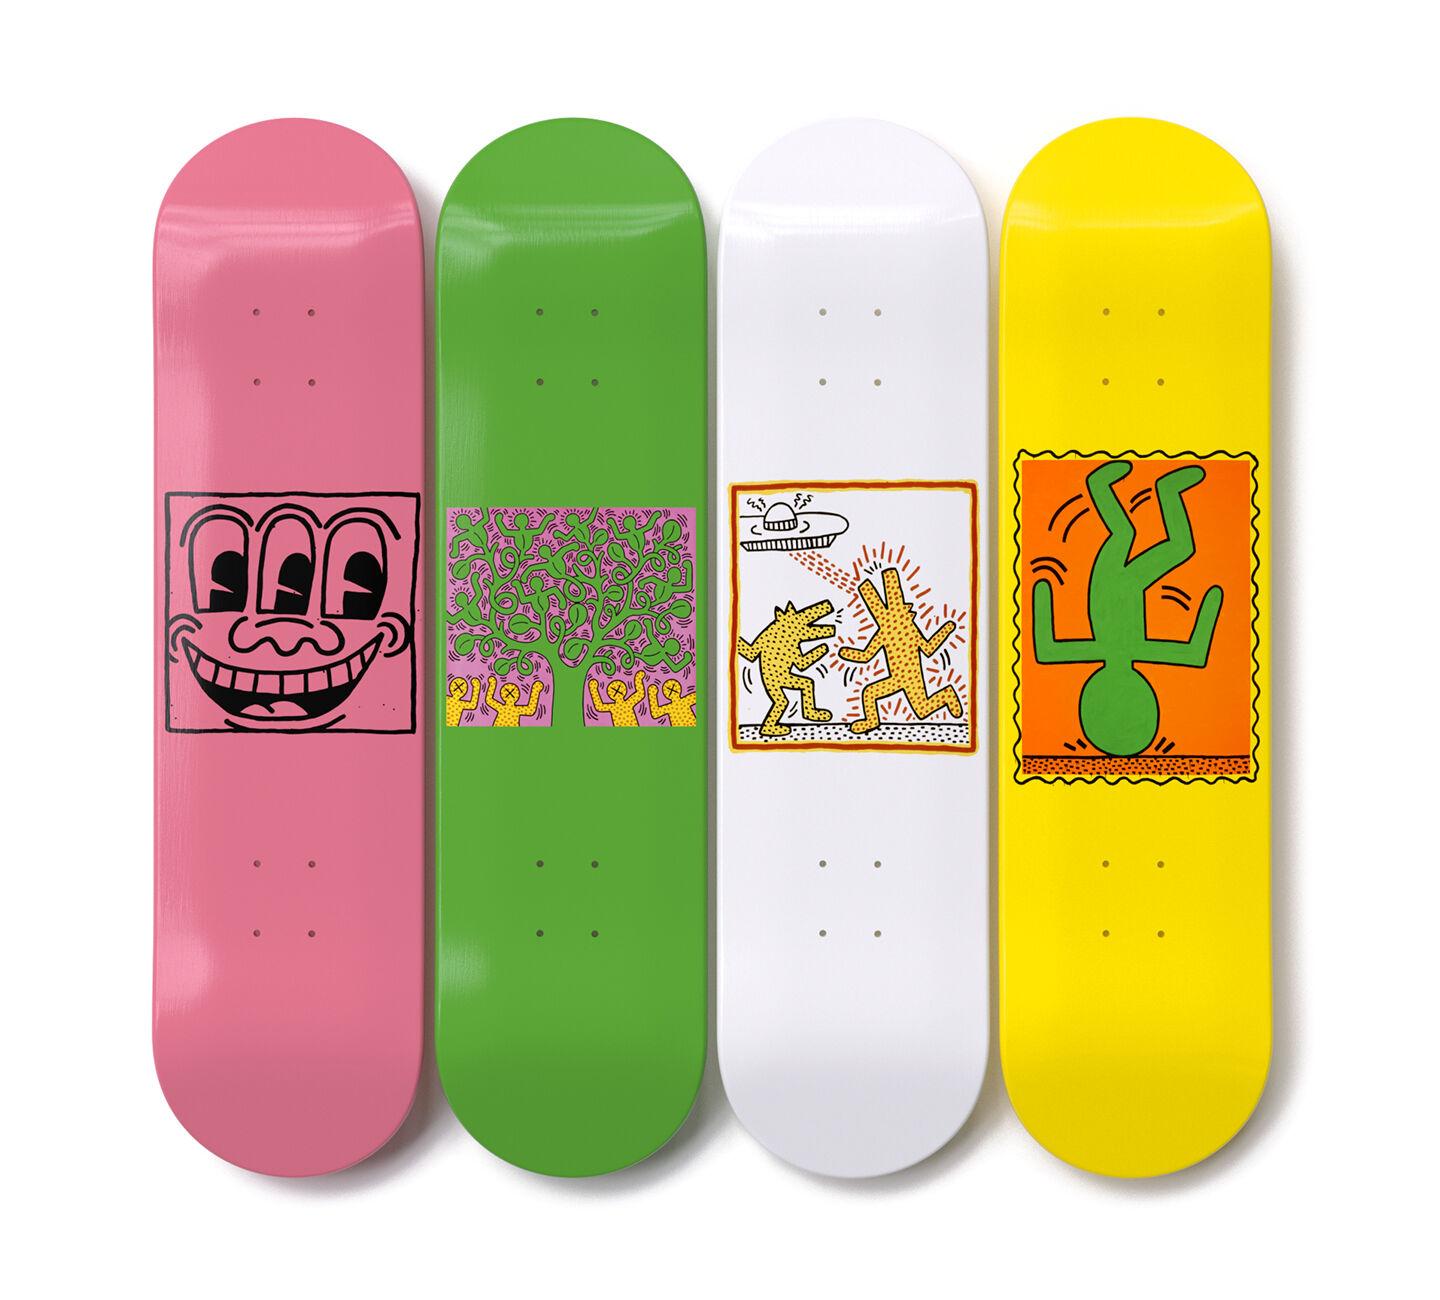 Keith Haring
Art Is For Everybody, 2023
7 ply Grade A Canadian Maple wood (Set of 4)
31 1/2 × 7 9/10 in  80 × 20 cm (each)